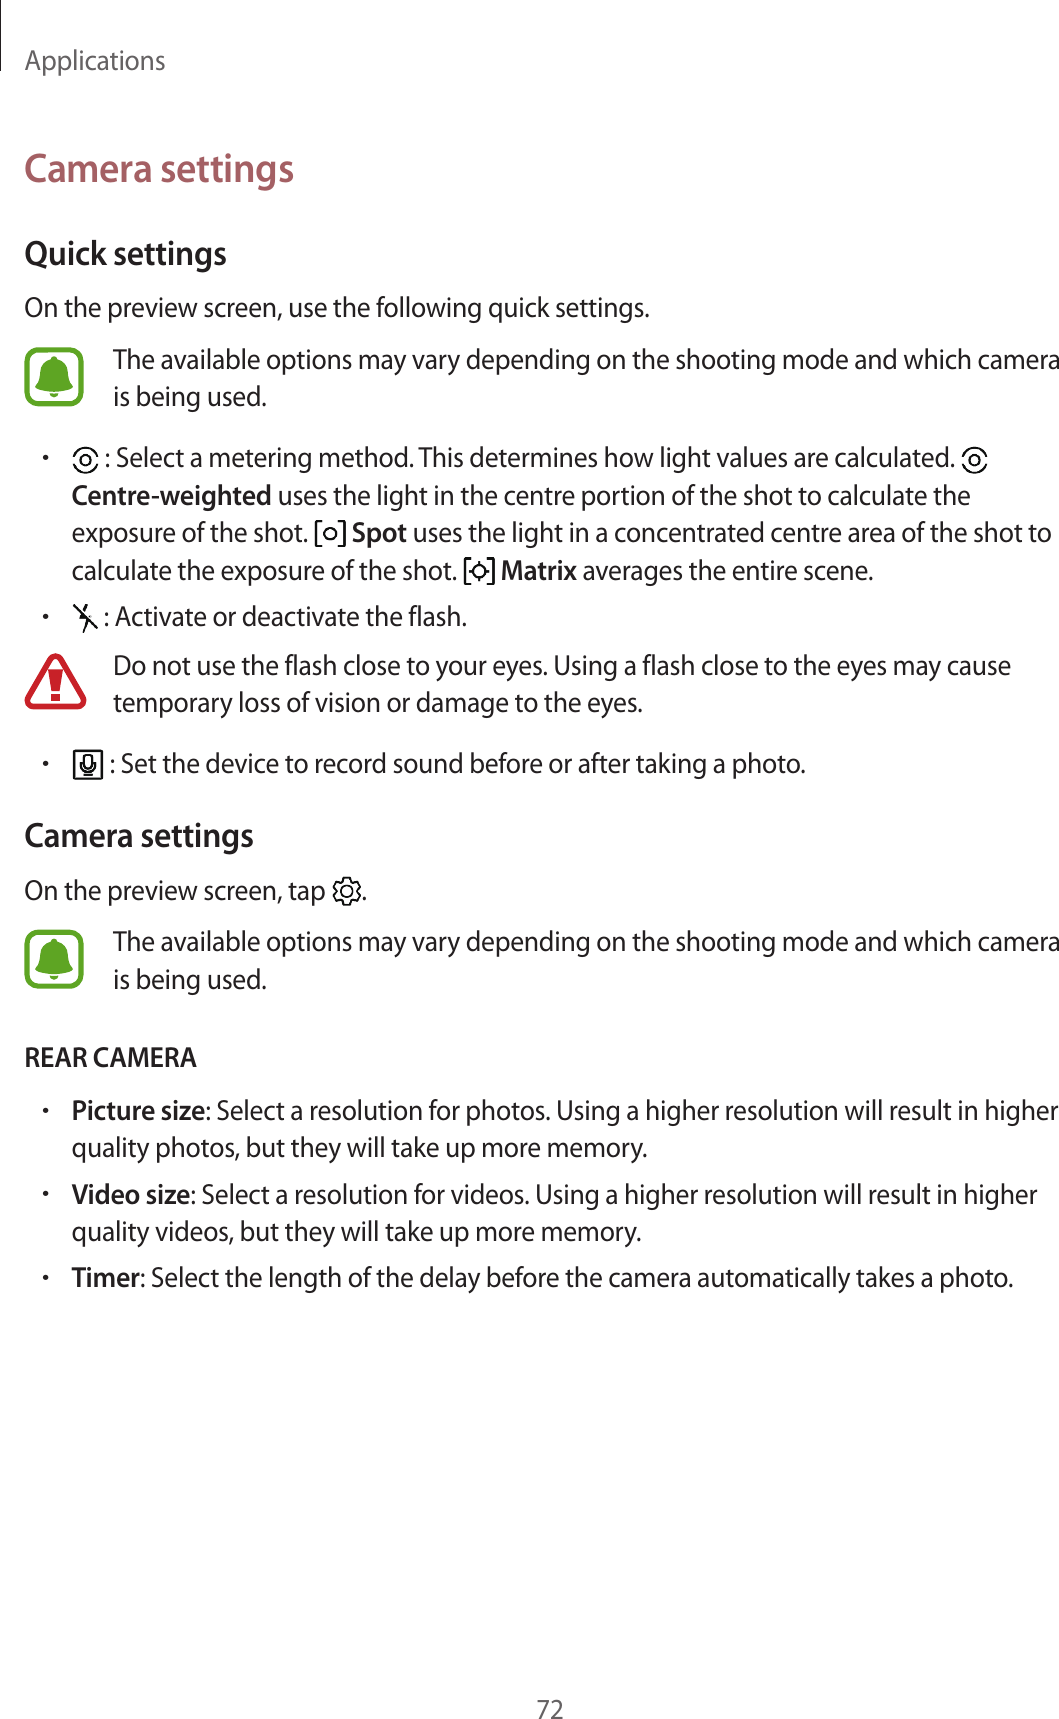 Applications72Camera settingsQuick settingsOn the preview screen, use the following quick settings.The available options may vary depending on the shooting mode and which camera is being used.• : Select a metering method. This determines how light values are calculated.   Centre-weighted uses the light in the centre portion of the shot to calculate the exposure of the shot.   Spot uses the light in a concentrated centre area of the shot to calculate the exposure of the shot.   Matrix averages the entire scene.• : Activate or deactivate the flash.Do not use the flash close to your eyes. Using a flash close to the eyes may cause temporary loss of vision or damage to the eyes.• : Set the device to record sound before or after taking a photo.Camera settingsOn the preview screen, tap  .The available options may vary depending on the shooting mode and which camera is being used.REAR CAMERA•Picture size: Select a resolution for photos. Using a higher resolution will result in higher quality photos, but they will take up more memory.•Video size: Select a resolution for videos. Using a higher resolution will result in higher quality videos, but they will take up more memory.•Timer: Select the length of the delay before the camera automatically takes a photo.